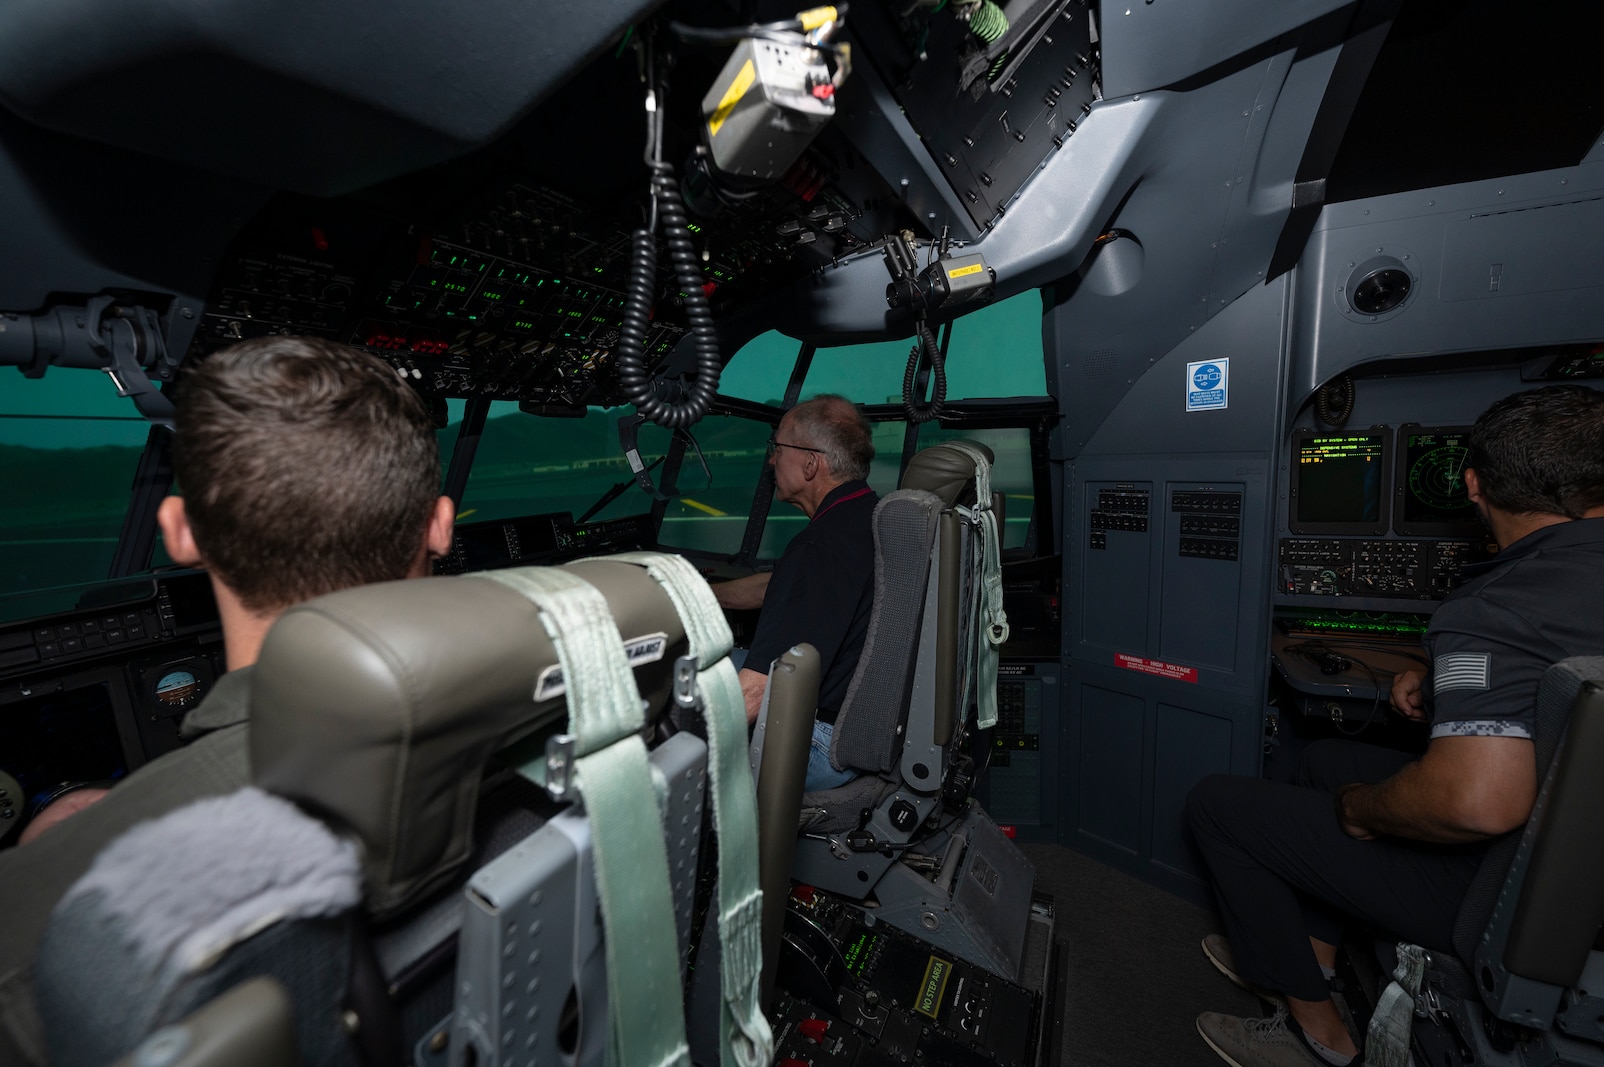 a picture of people inside a simulated airplane